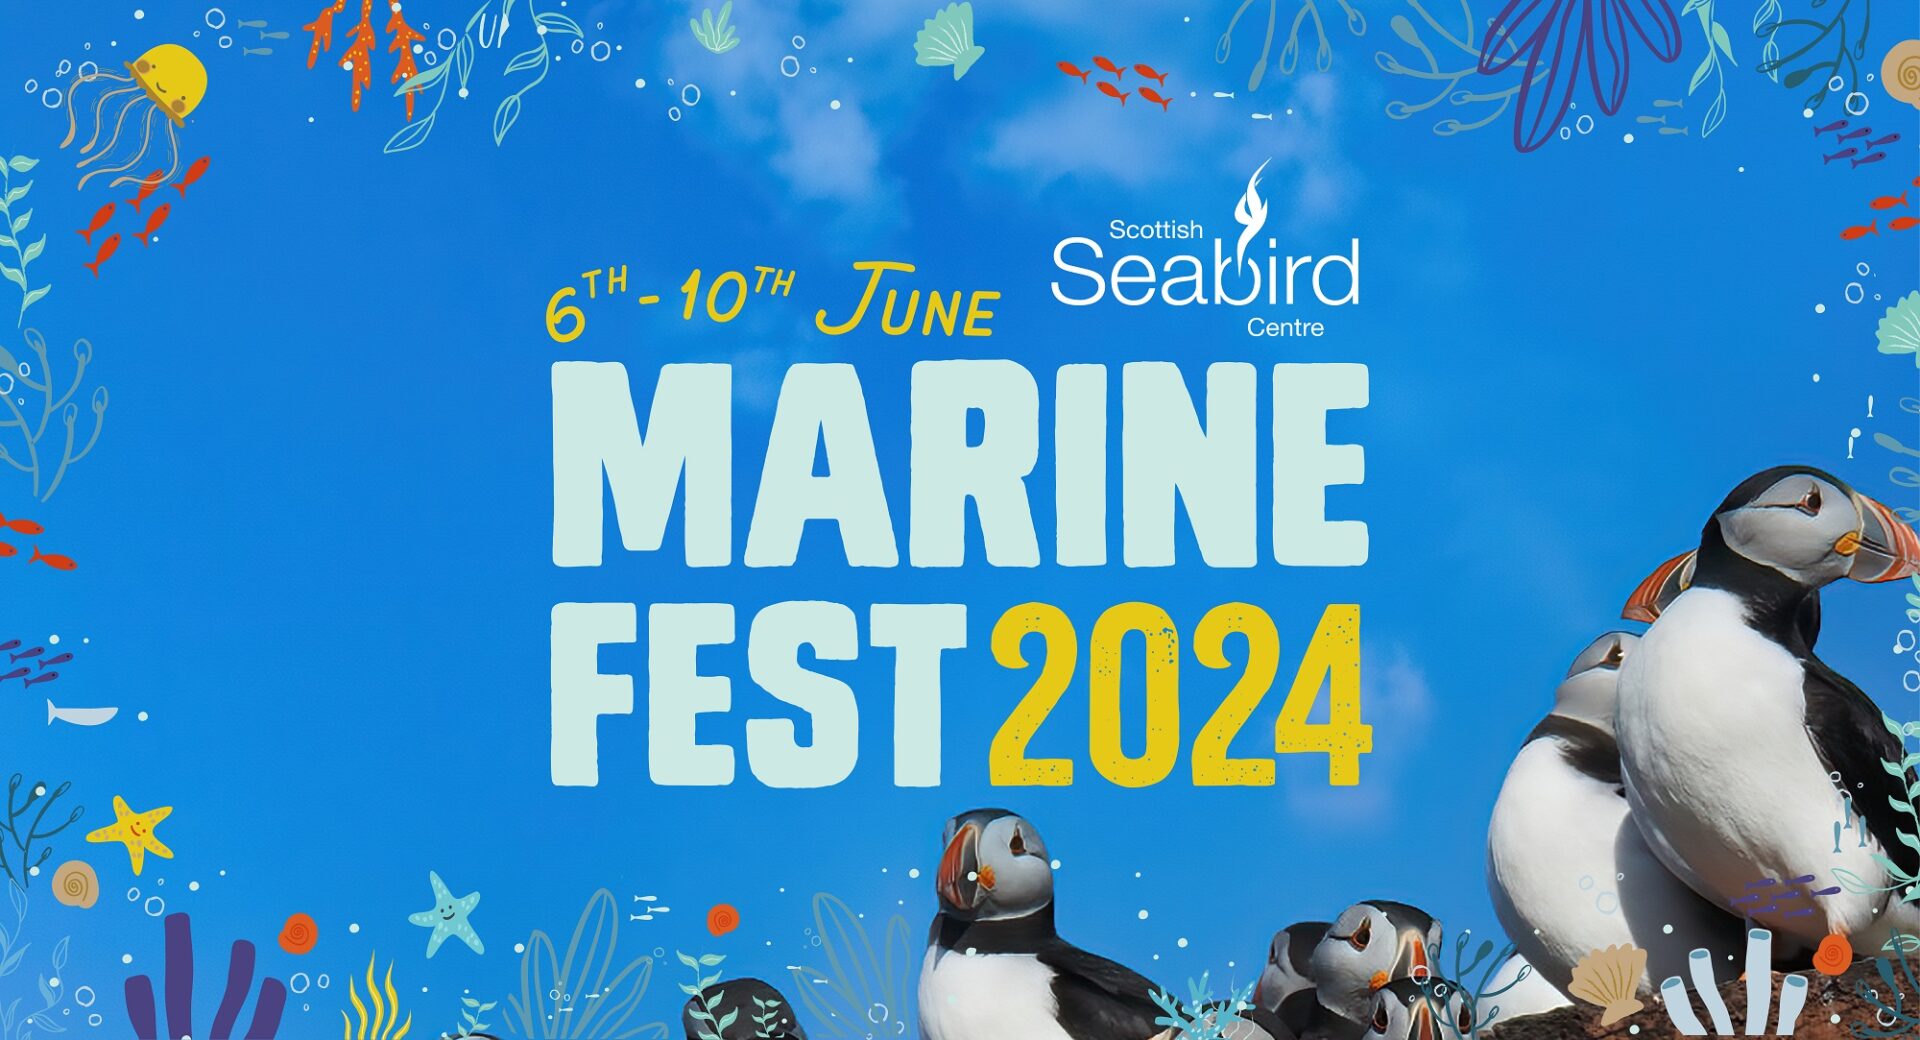 Marine Fest 2024 Poster image with date of event (6th - 10th June)